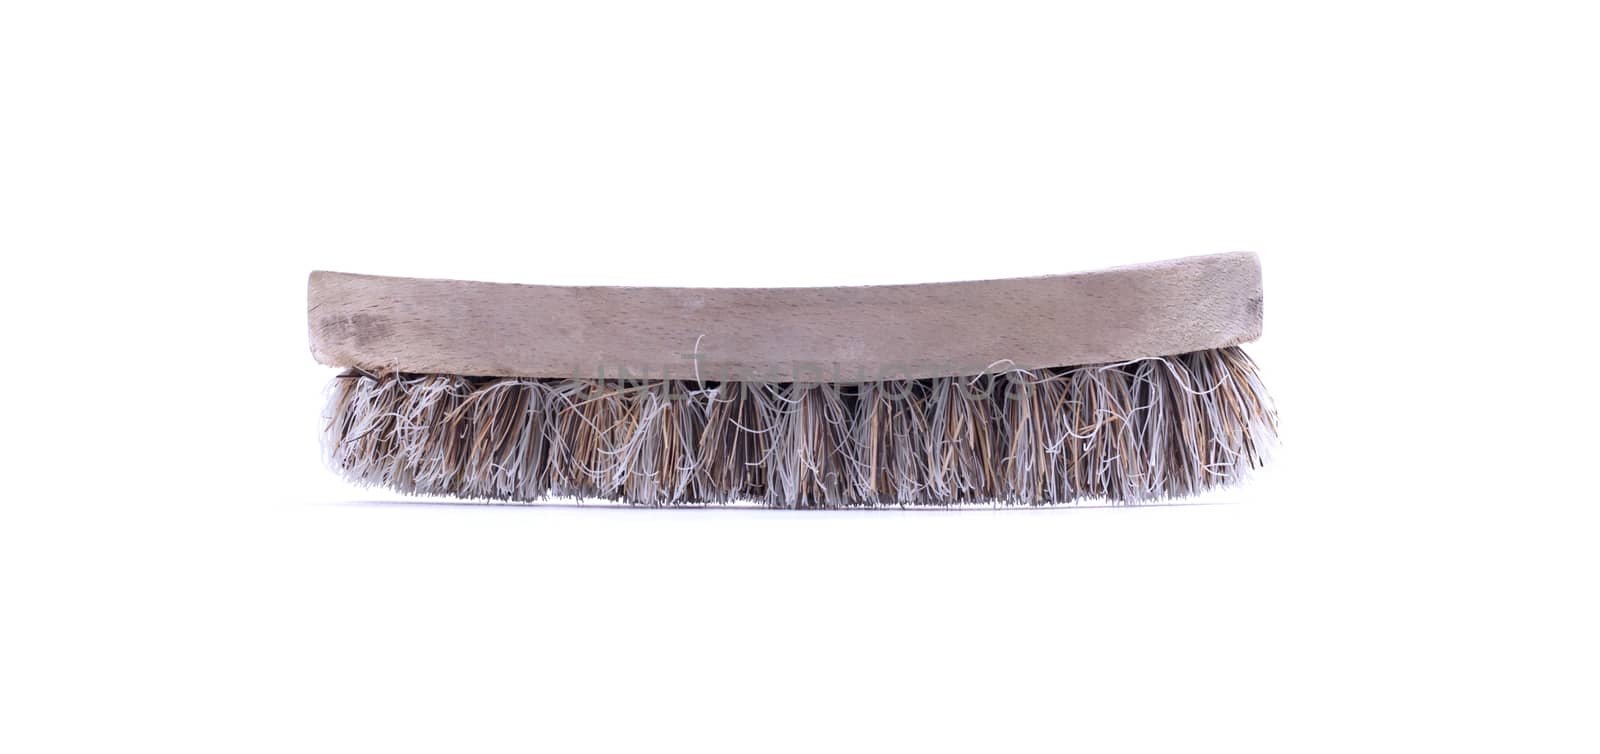 Dirty old cleaning brush, isolated on white